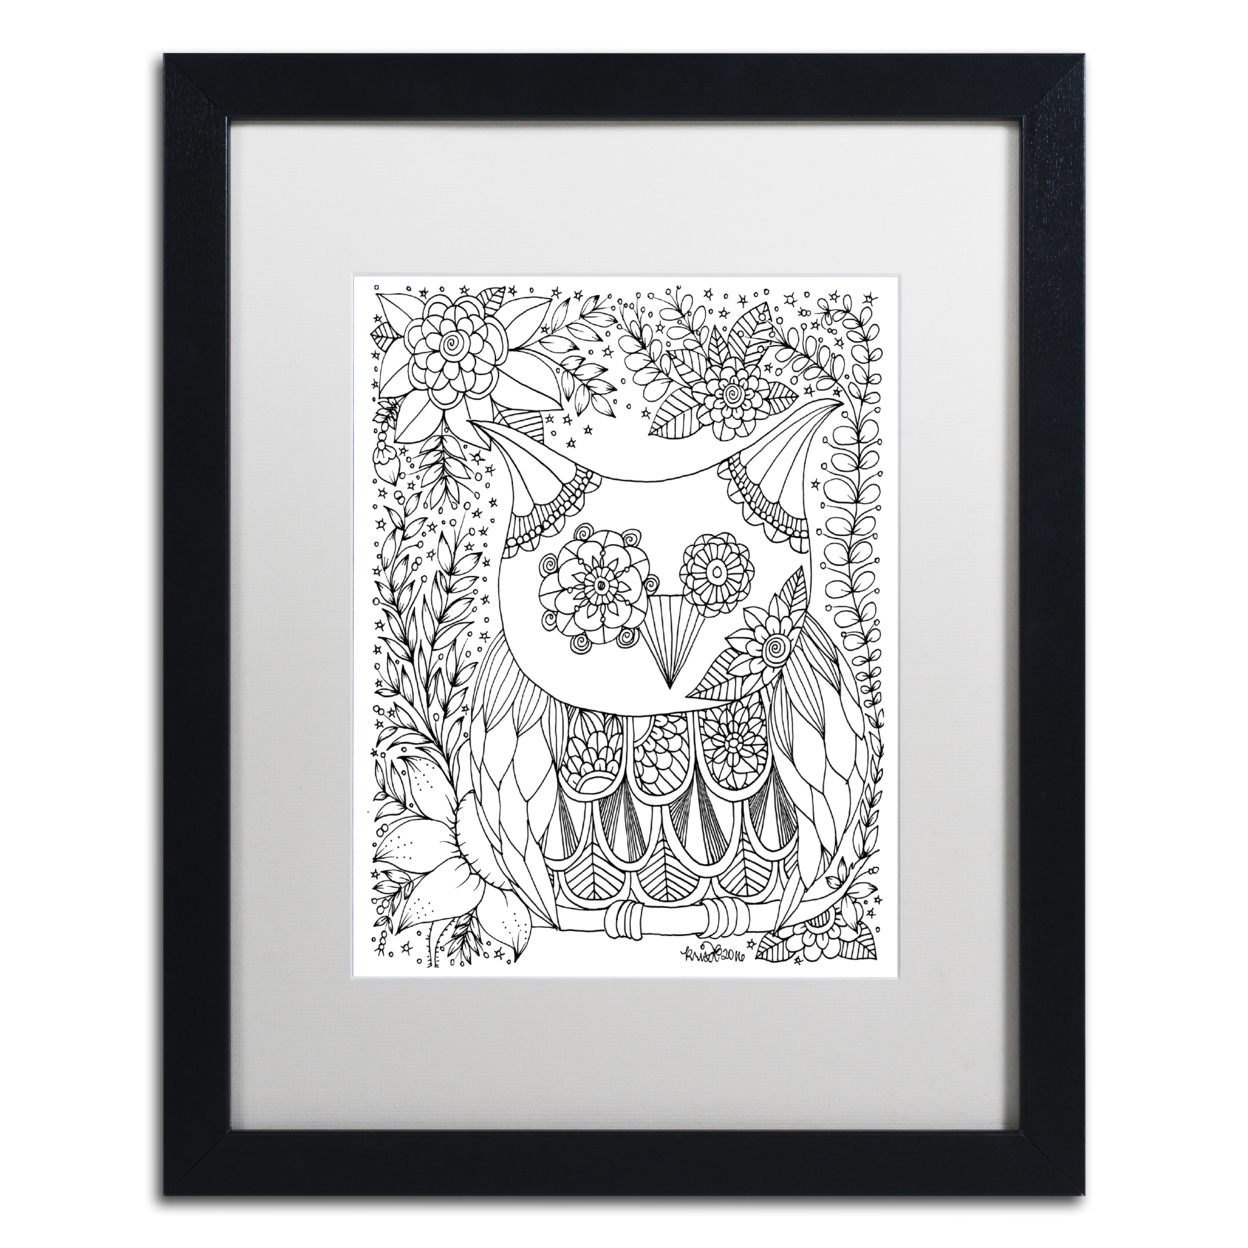 KCDoodleArt 'Fairies And Woodland Creatures 20' Black Wooden Framed Art 18 X 22 Inches